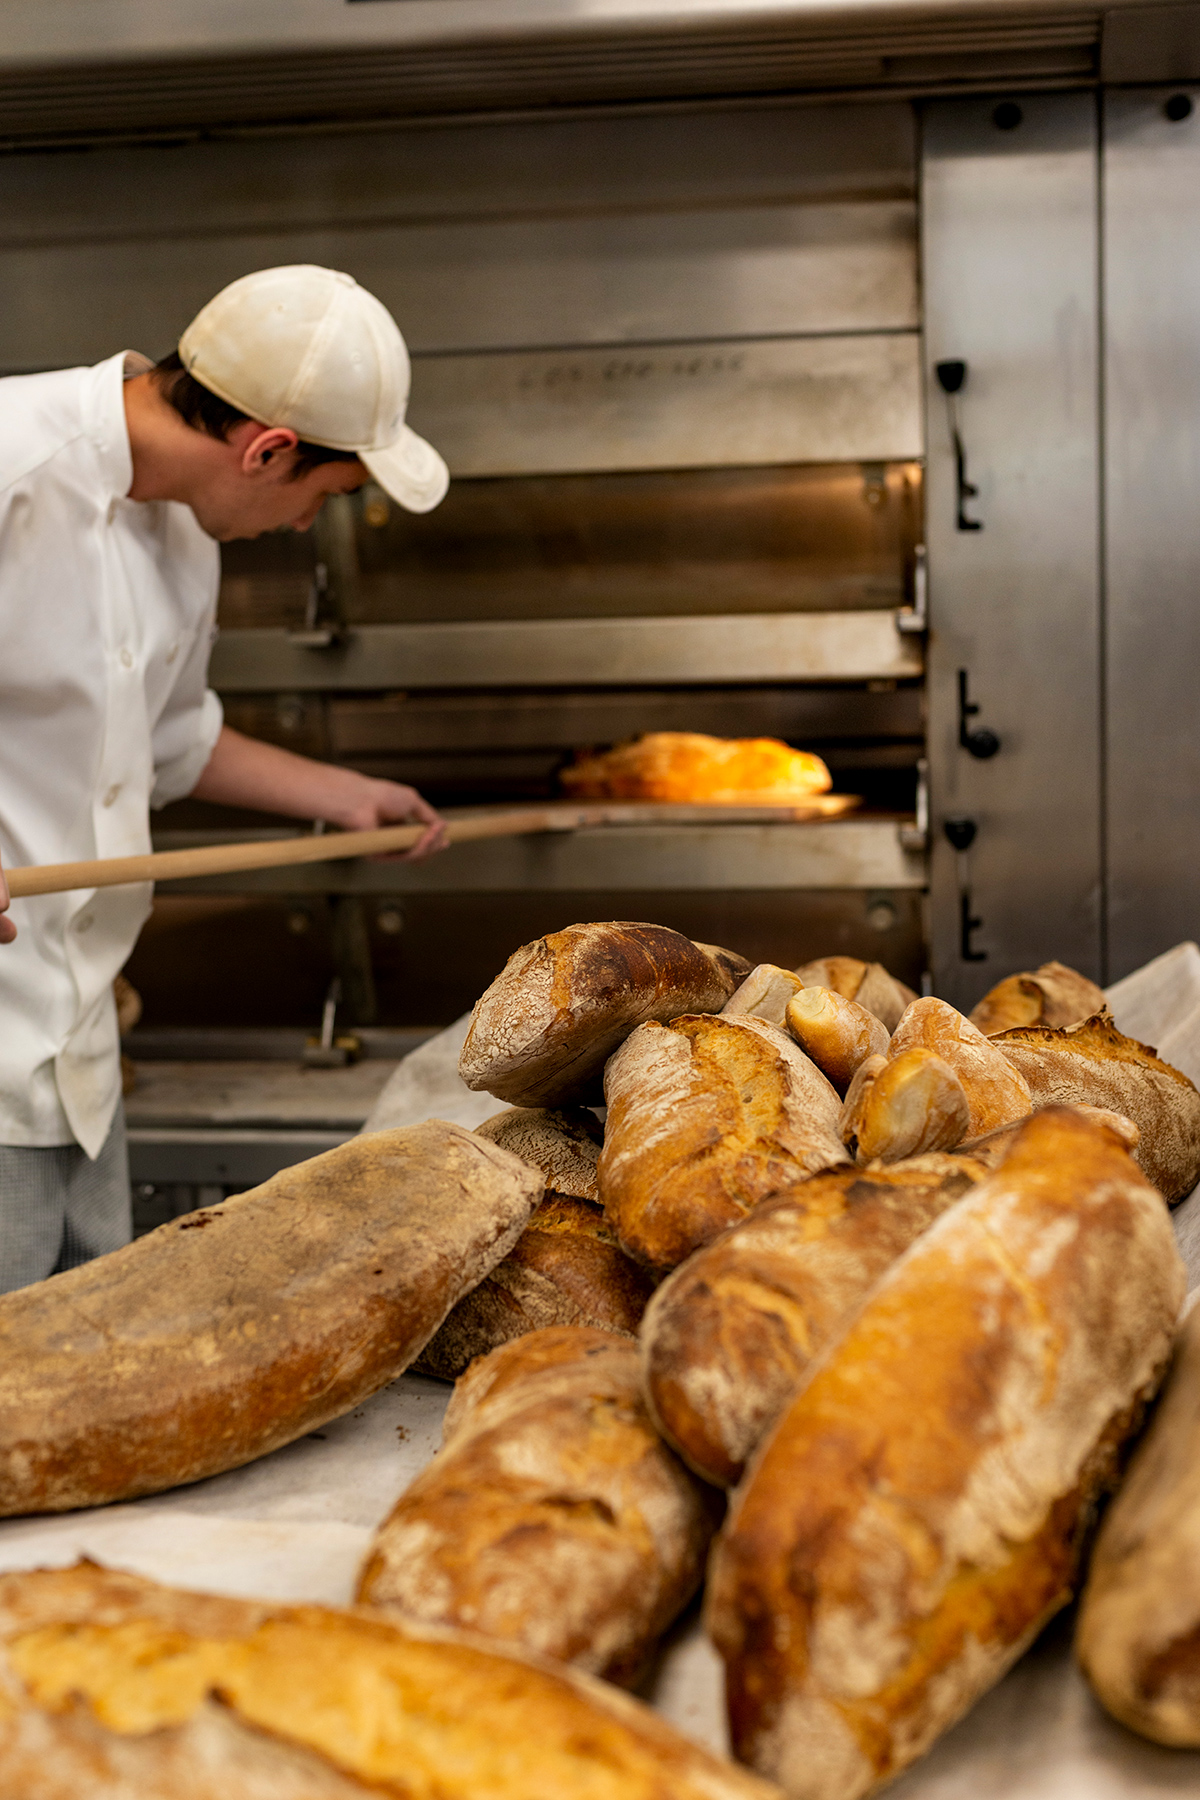 Baker pulling warm loaves of bread from the oven